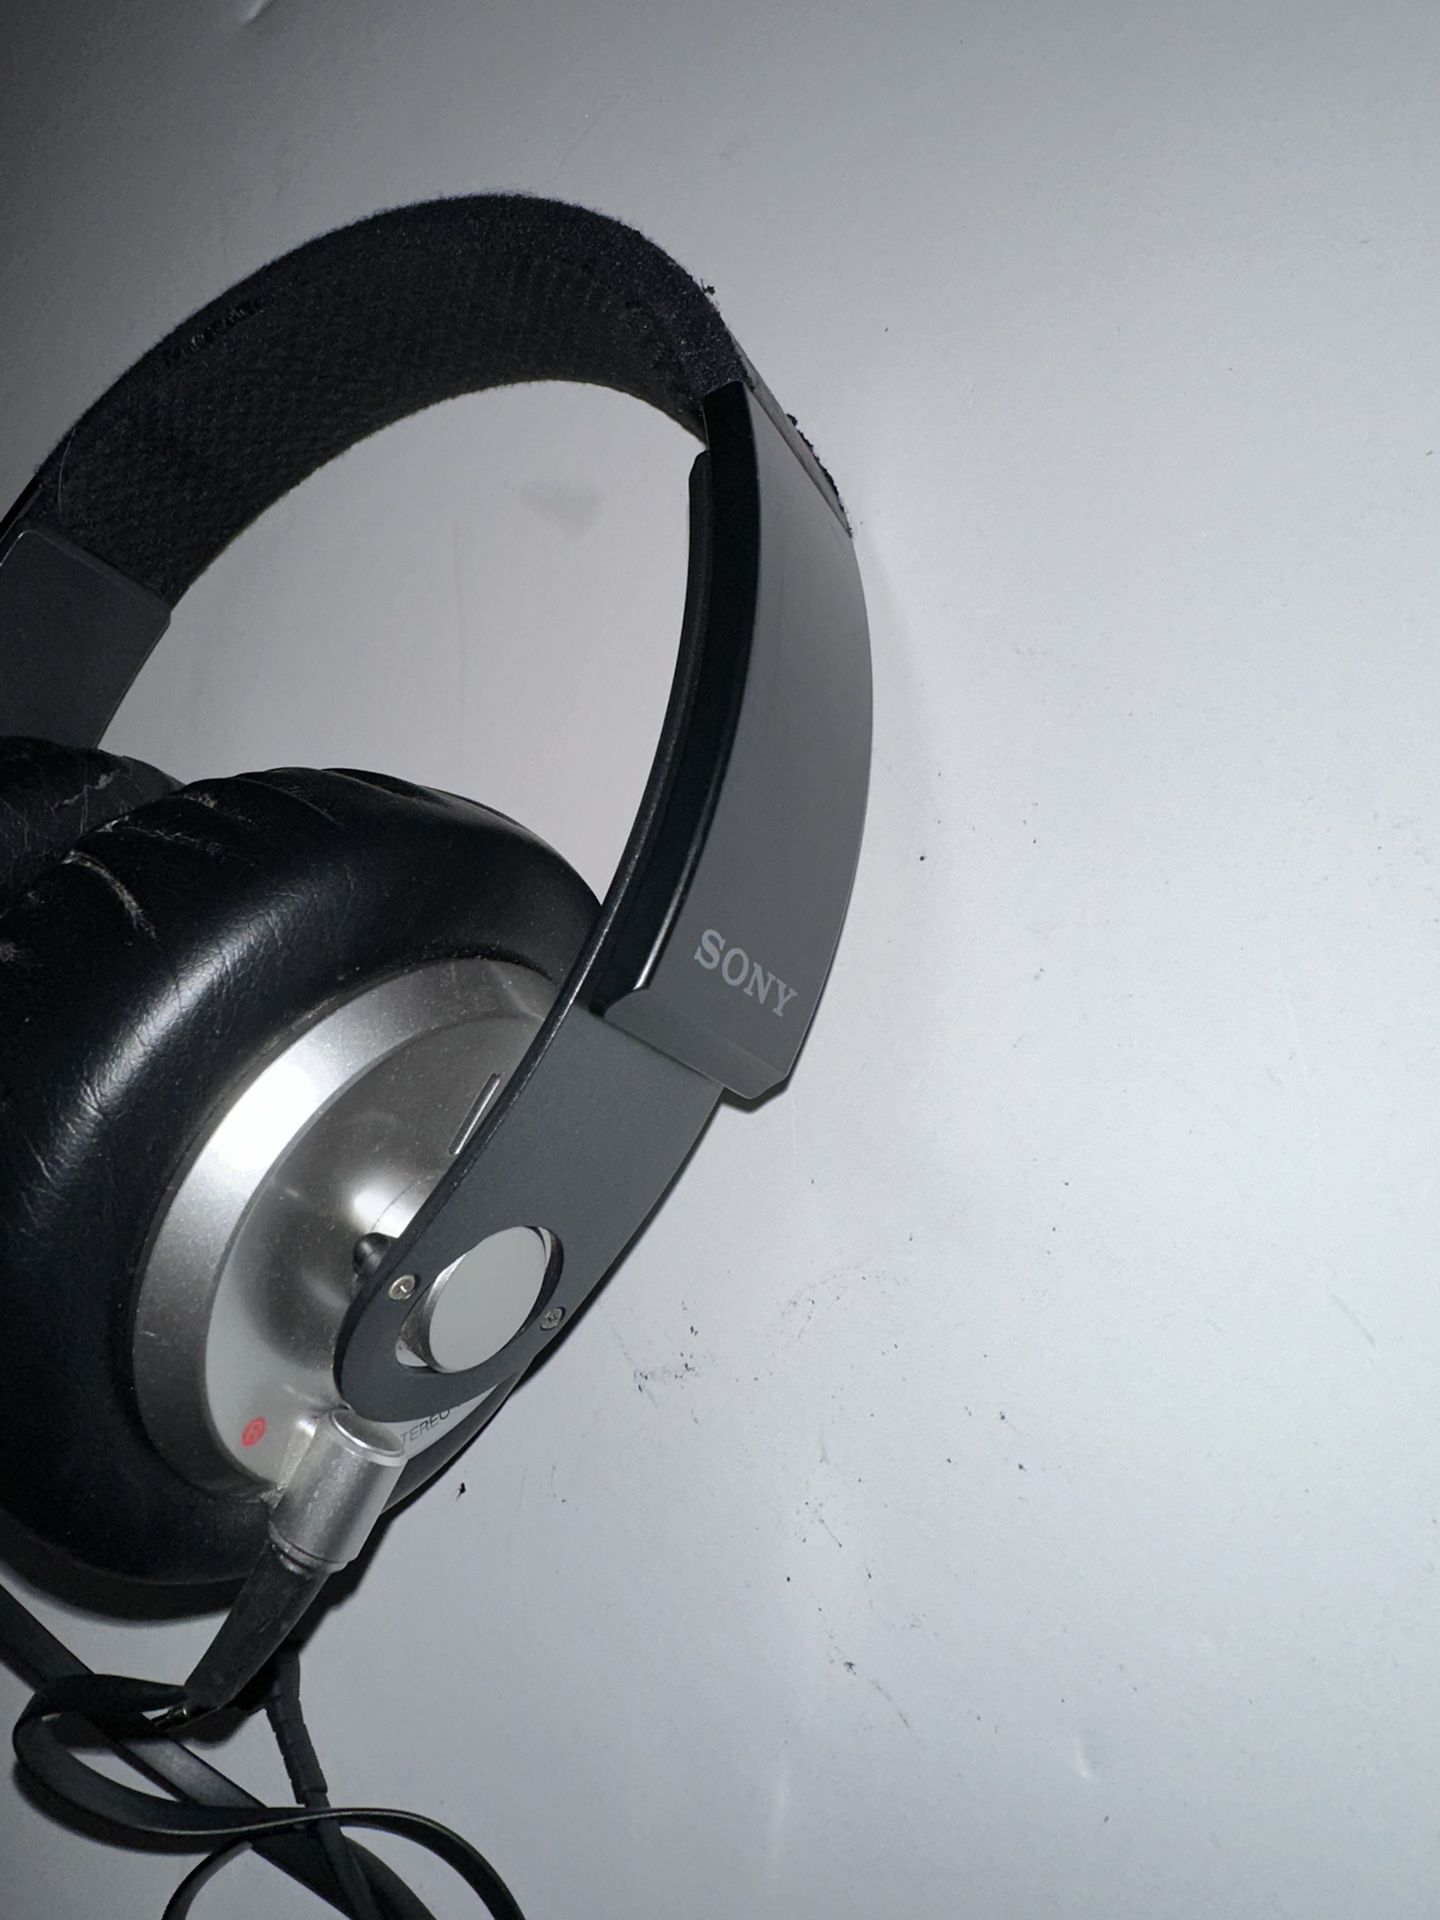 Sony MDR-XB500 Over-the-Ear Headphones